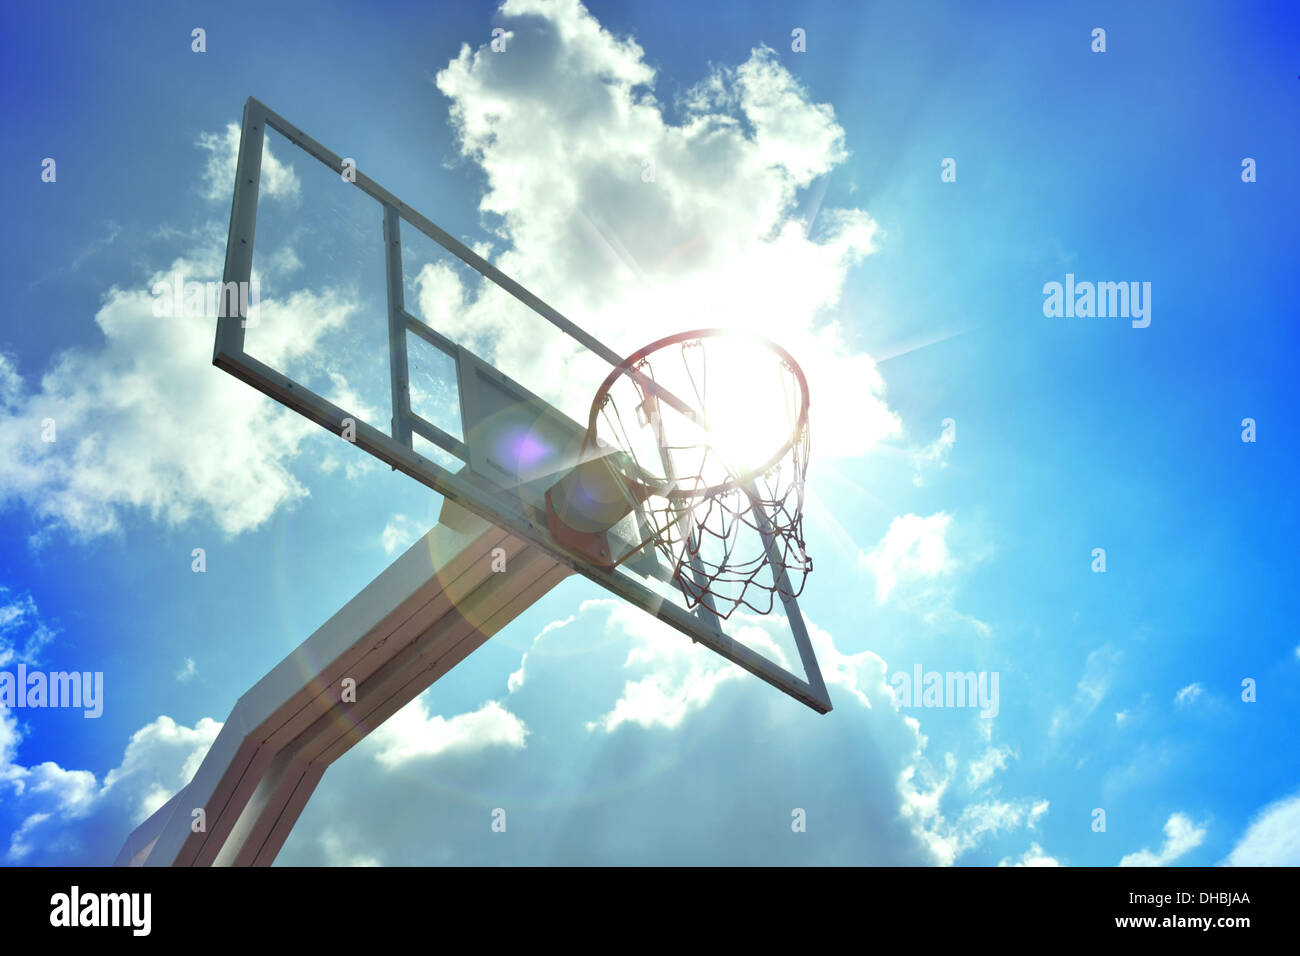 Basketball hoop in the blue sky Stock Photo